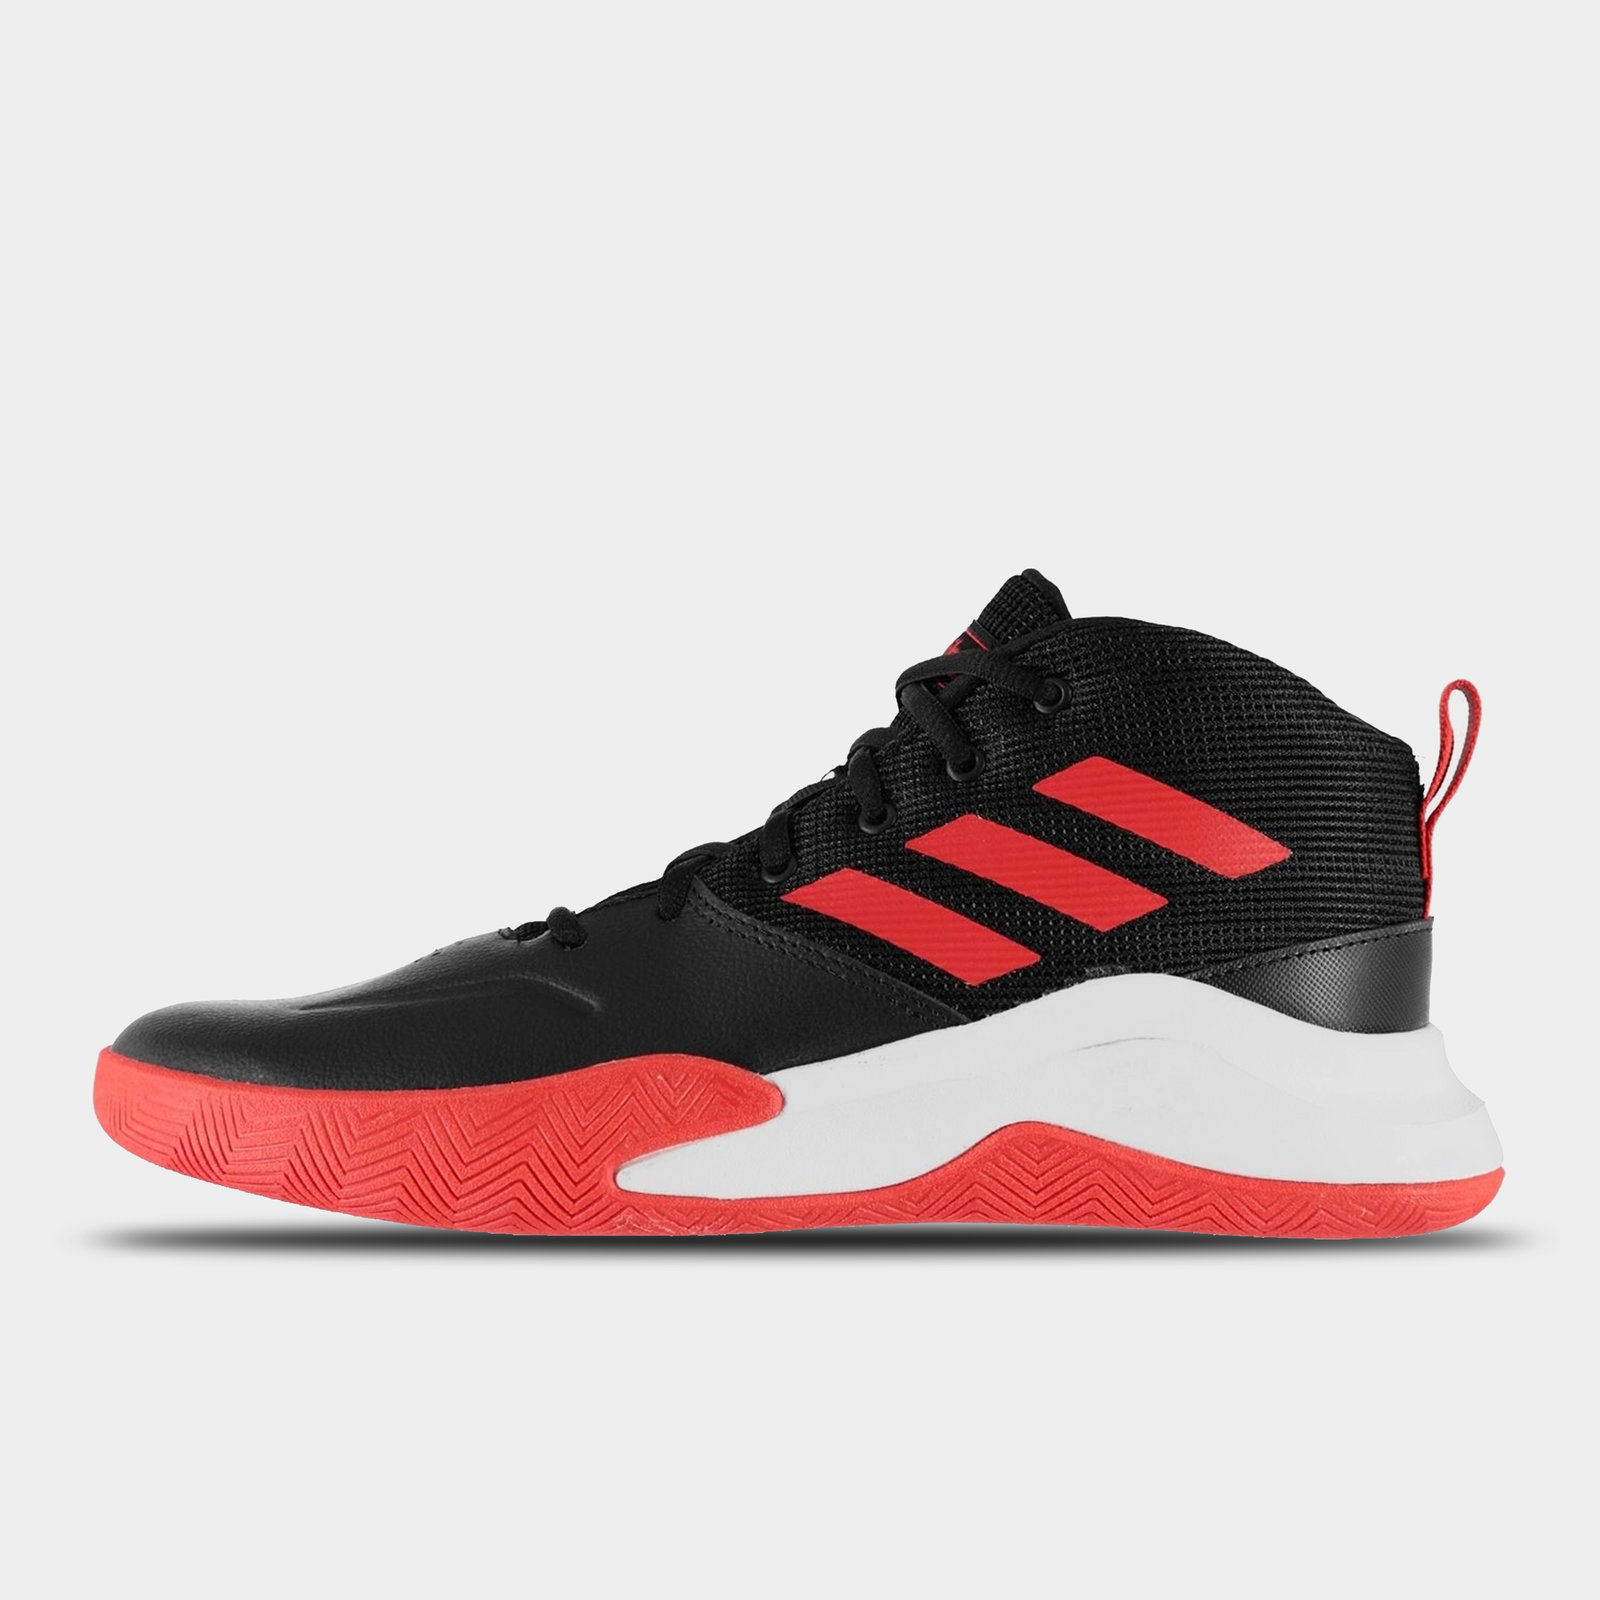 adidas men's own the game basketball shoe